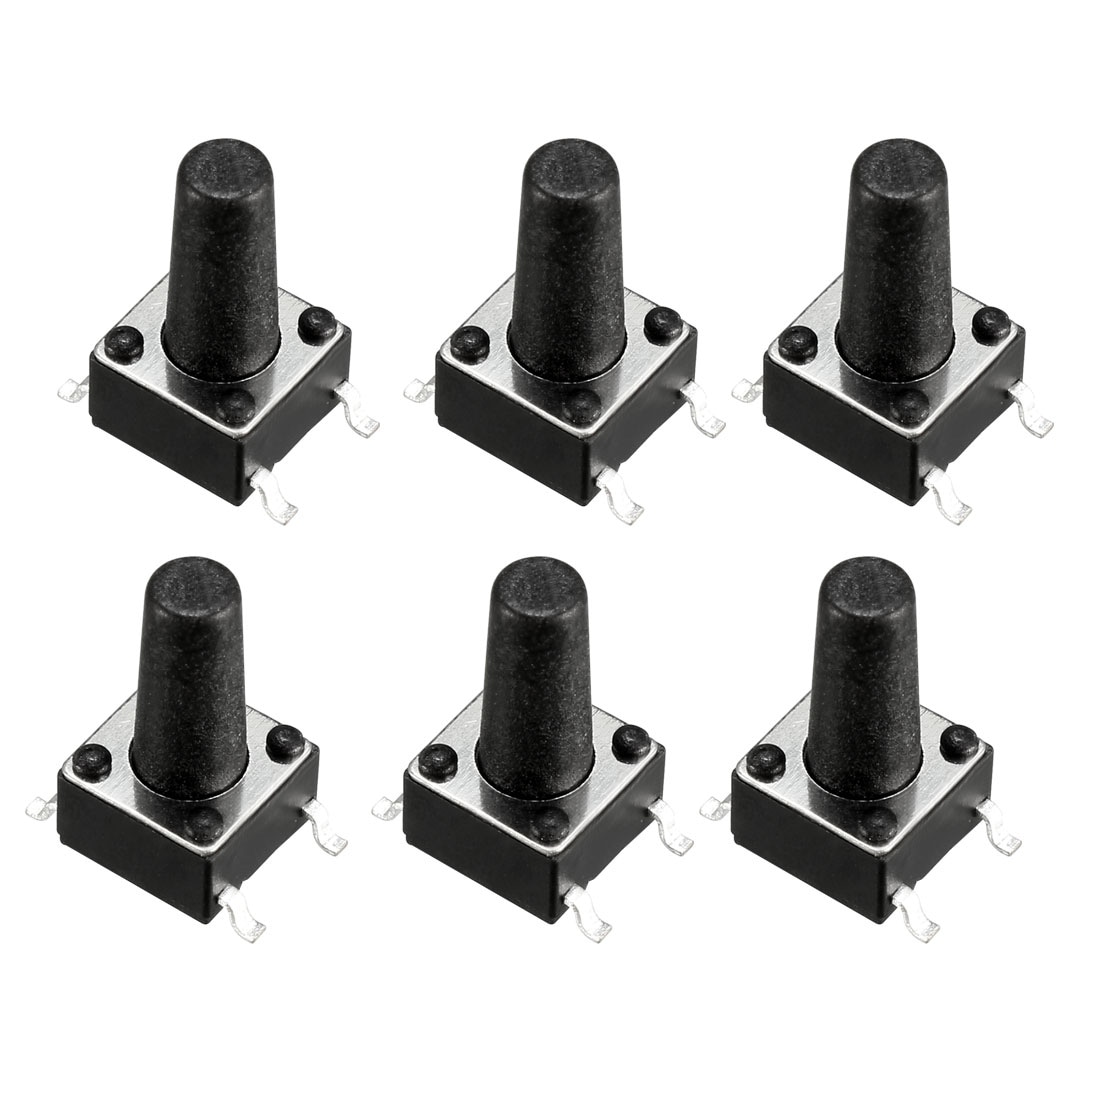 100 Pcs 2 Pin  Micro Momentary Push Button Tactile Switch 6x6x5mm New